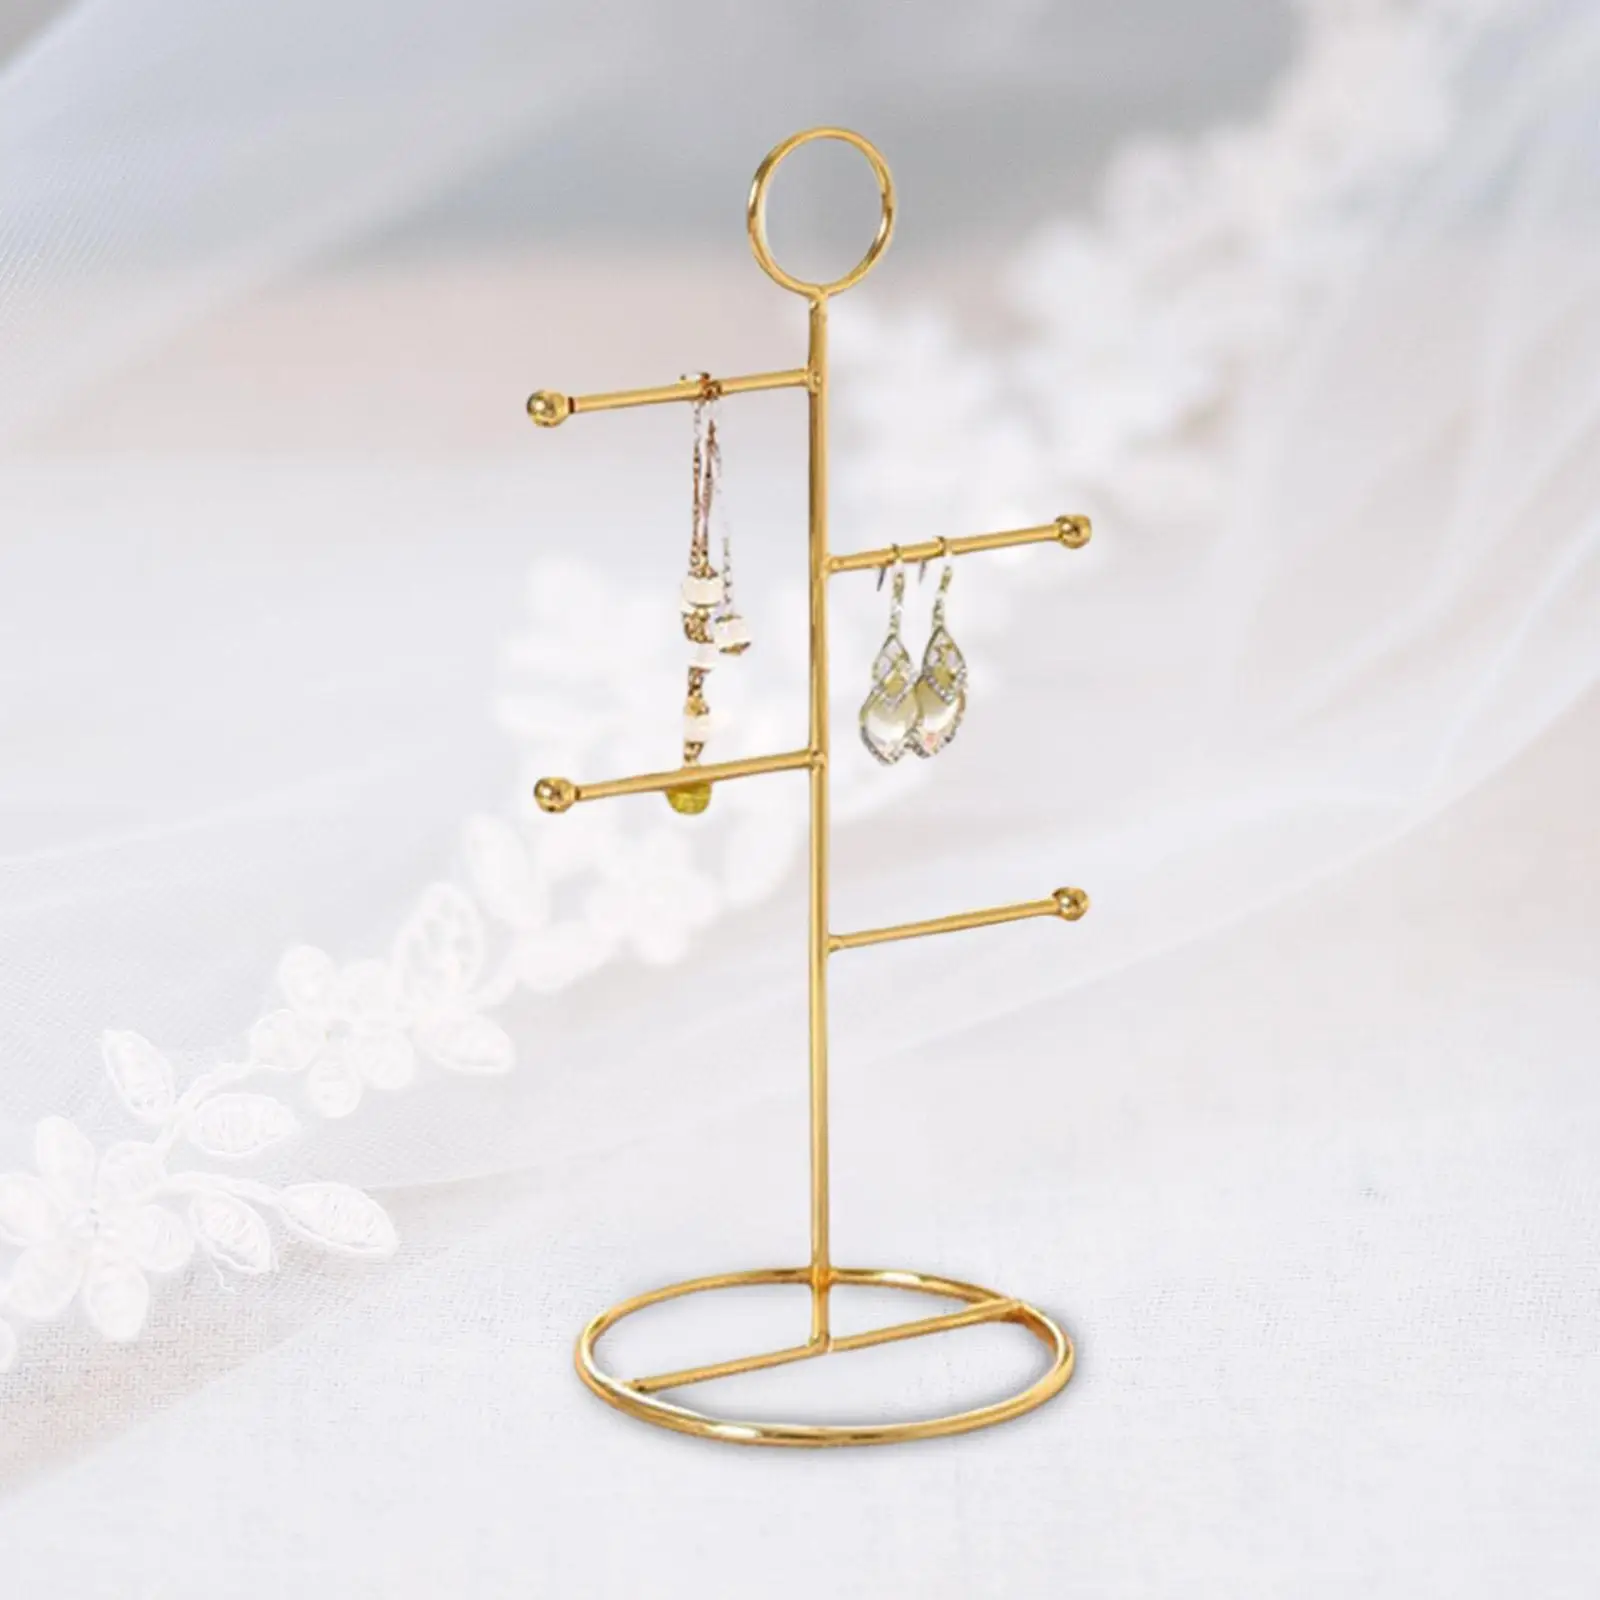 Necklace Jewelry Rack Holder Holder Decoration Multipurpose Organizer for Retail Store Women Necklaces Pendant Watch Bedroom